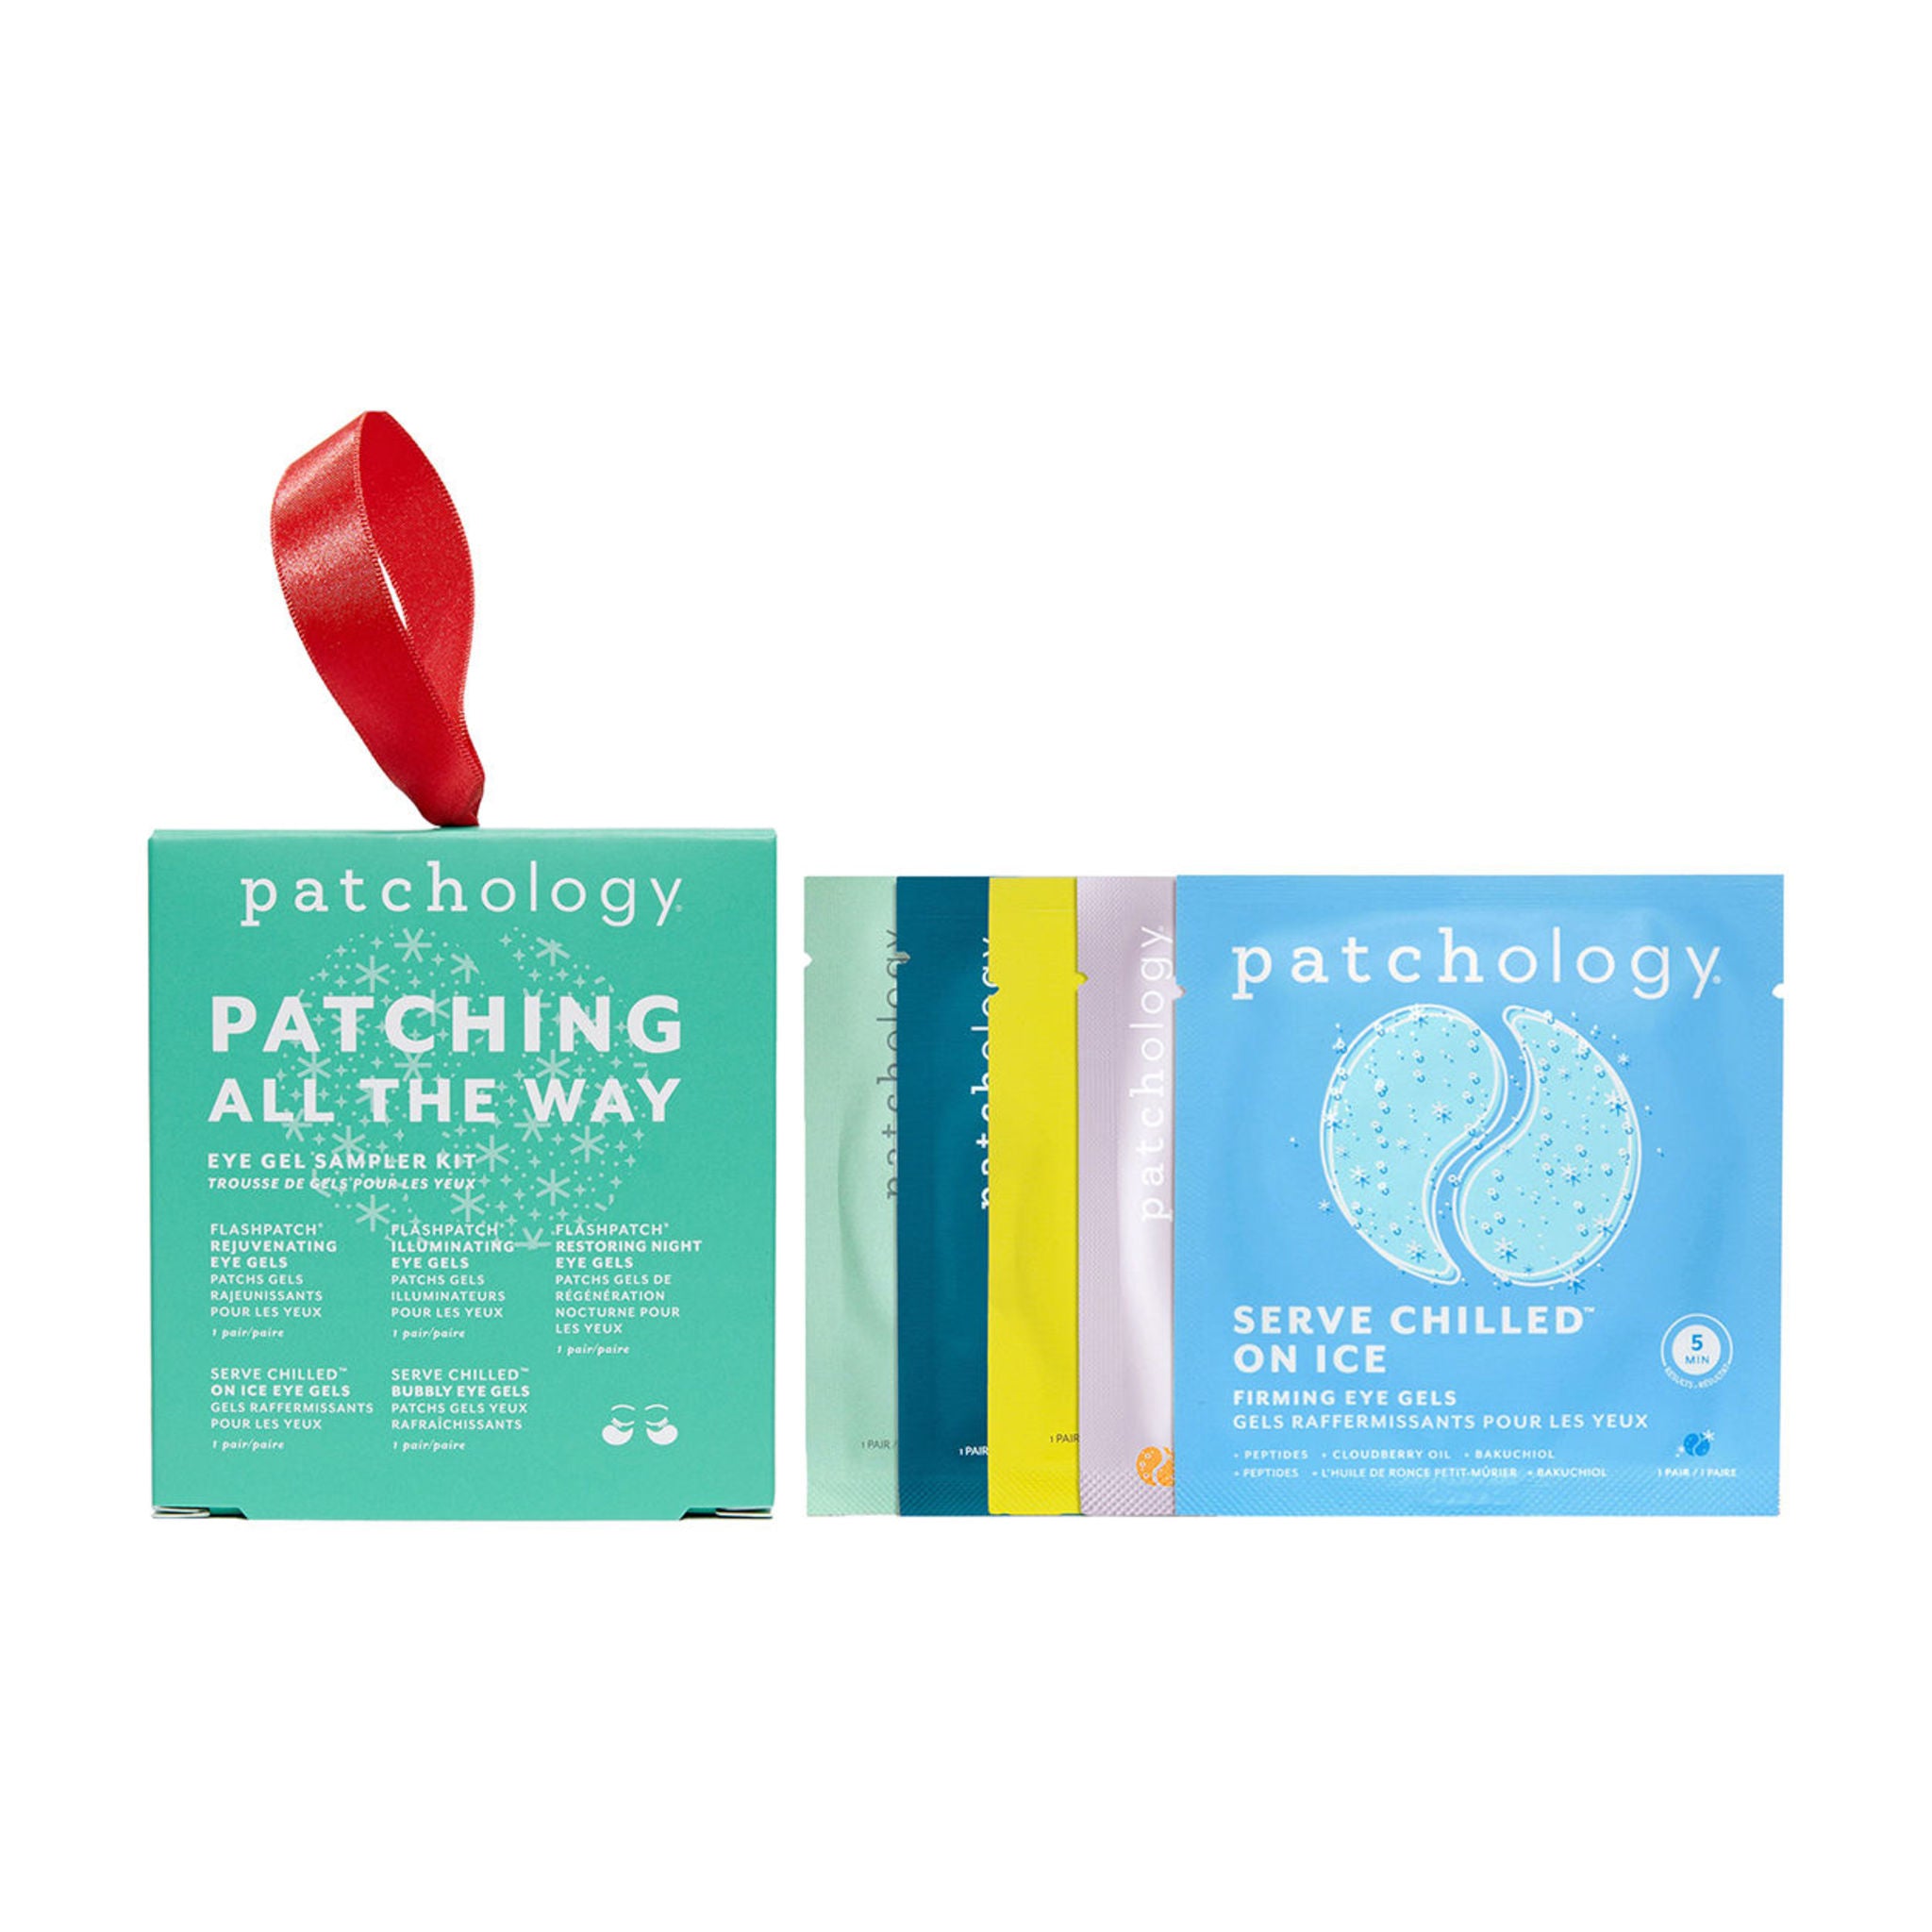 Patchology Patching All The Way-Eye Gel Sampler Kit (Limited Edition) main image.